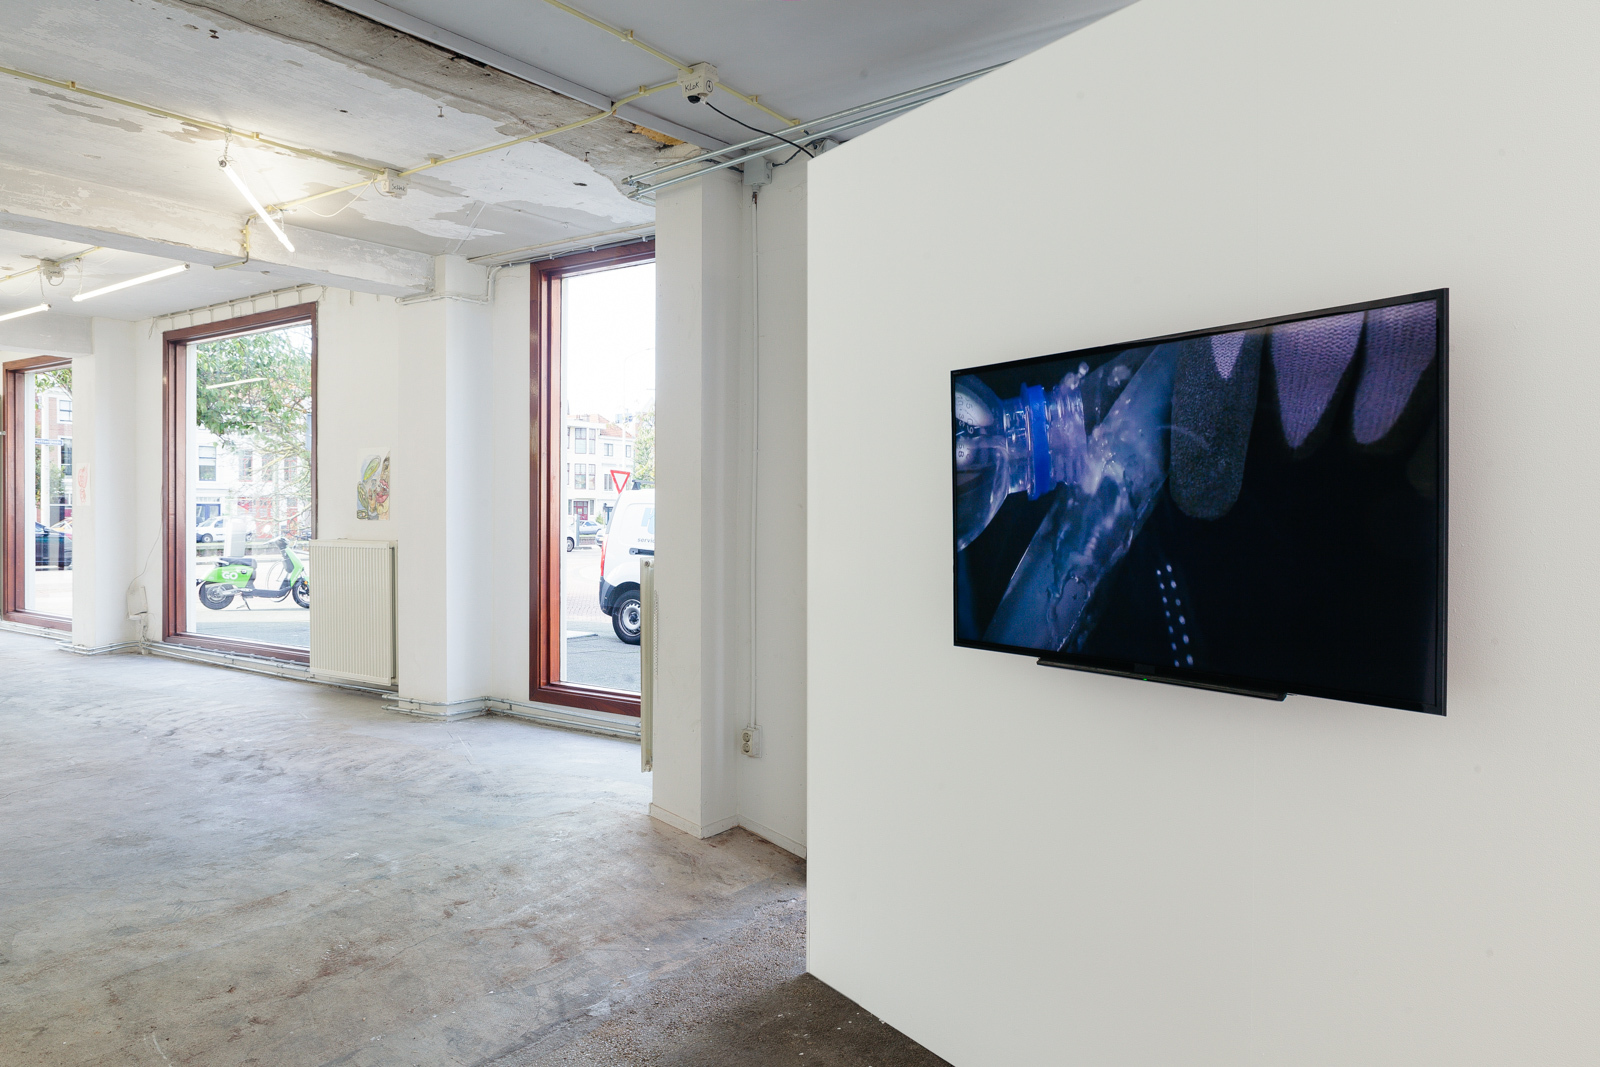 Exhibition View 4, Palpable Surfaces,2020, at Trixie The Hague